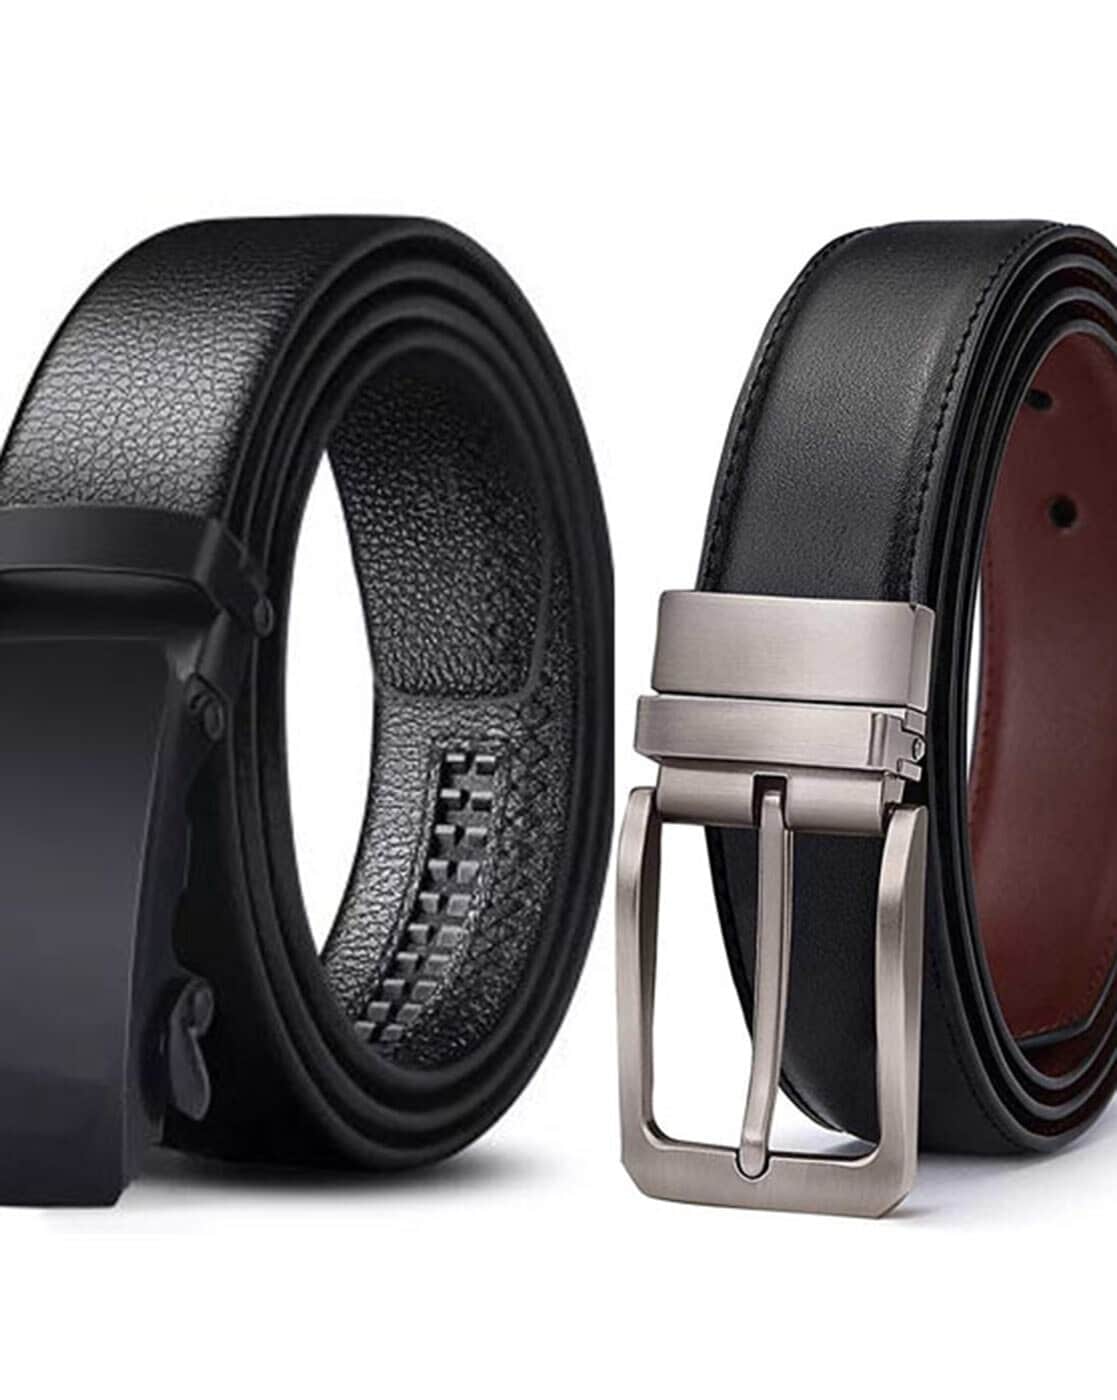 Fashion 2 In 1 Men's Luxury Leather Belts- Brown And Black